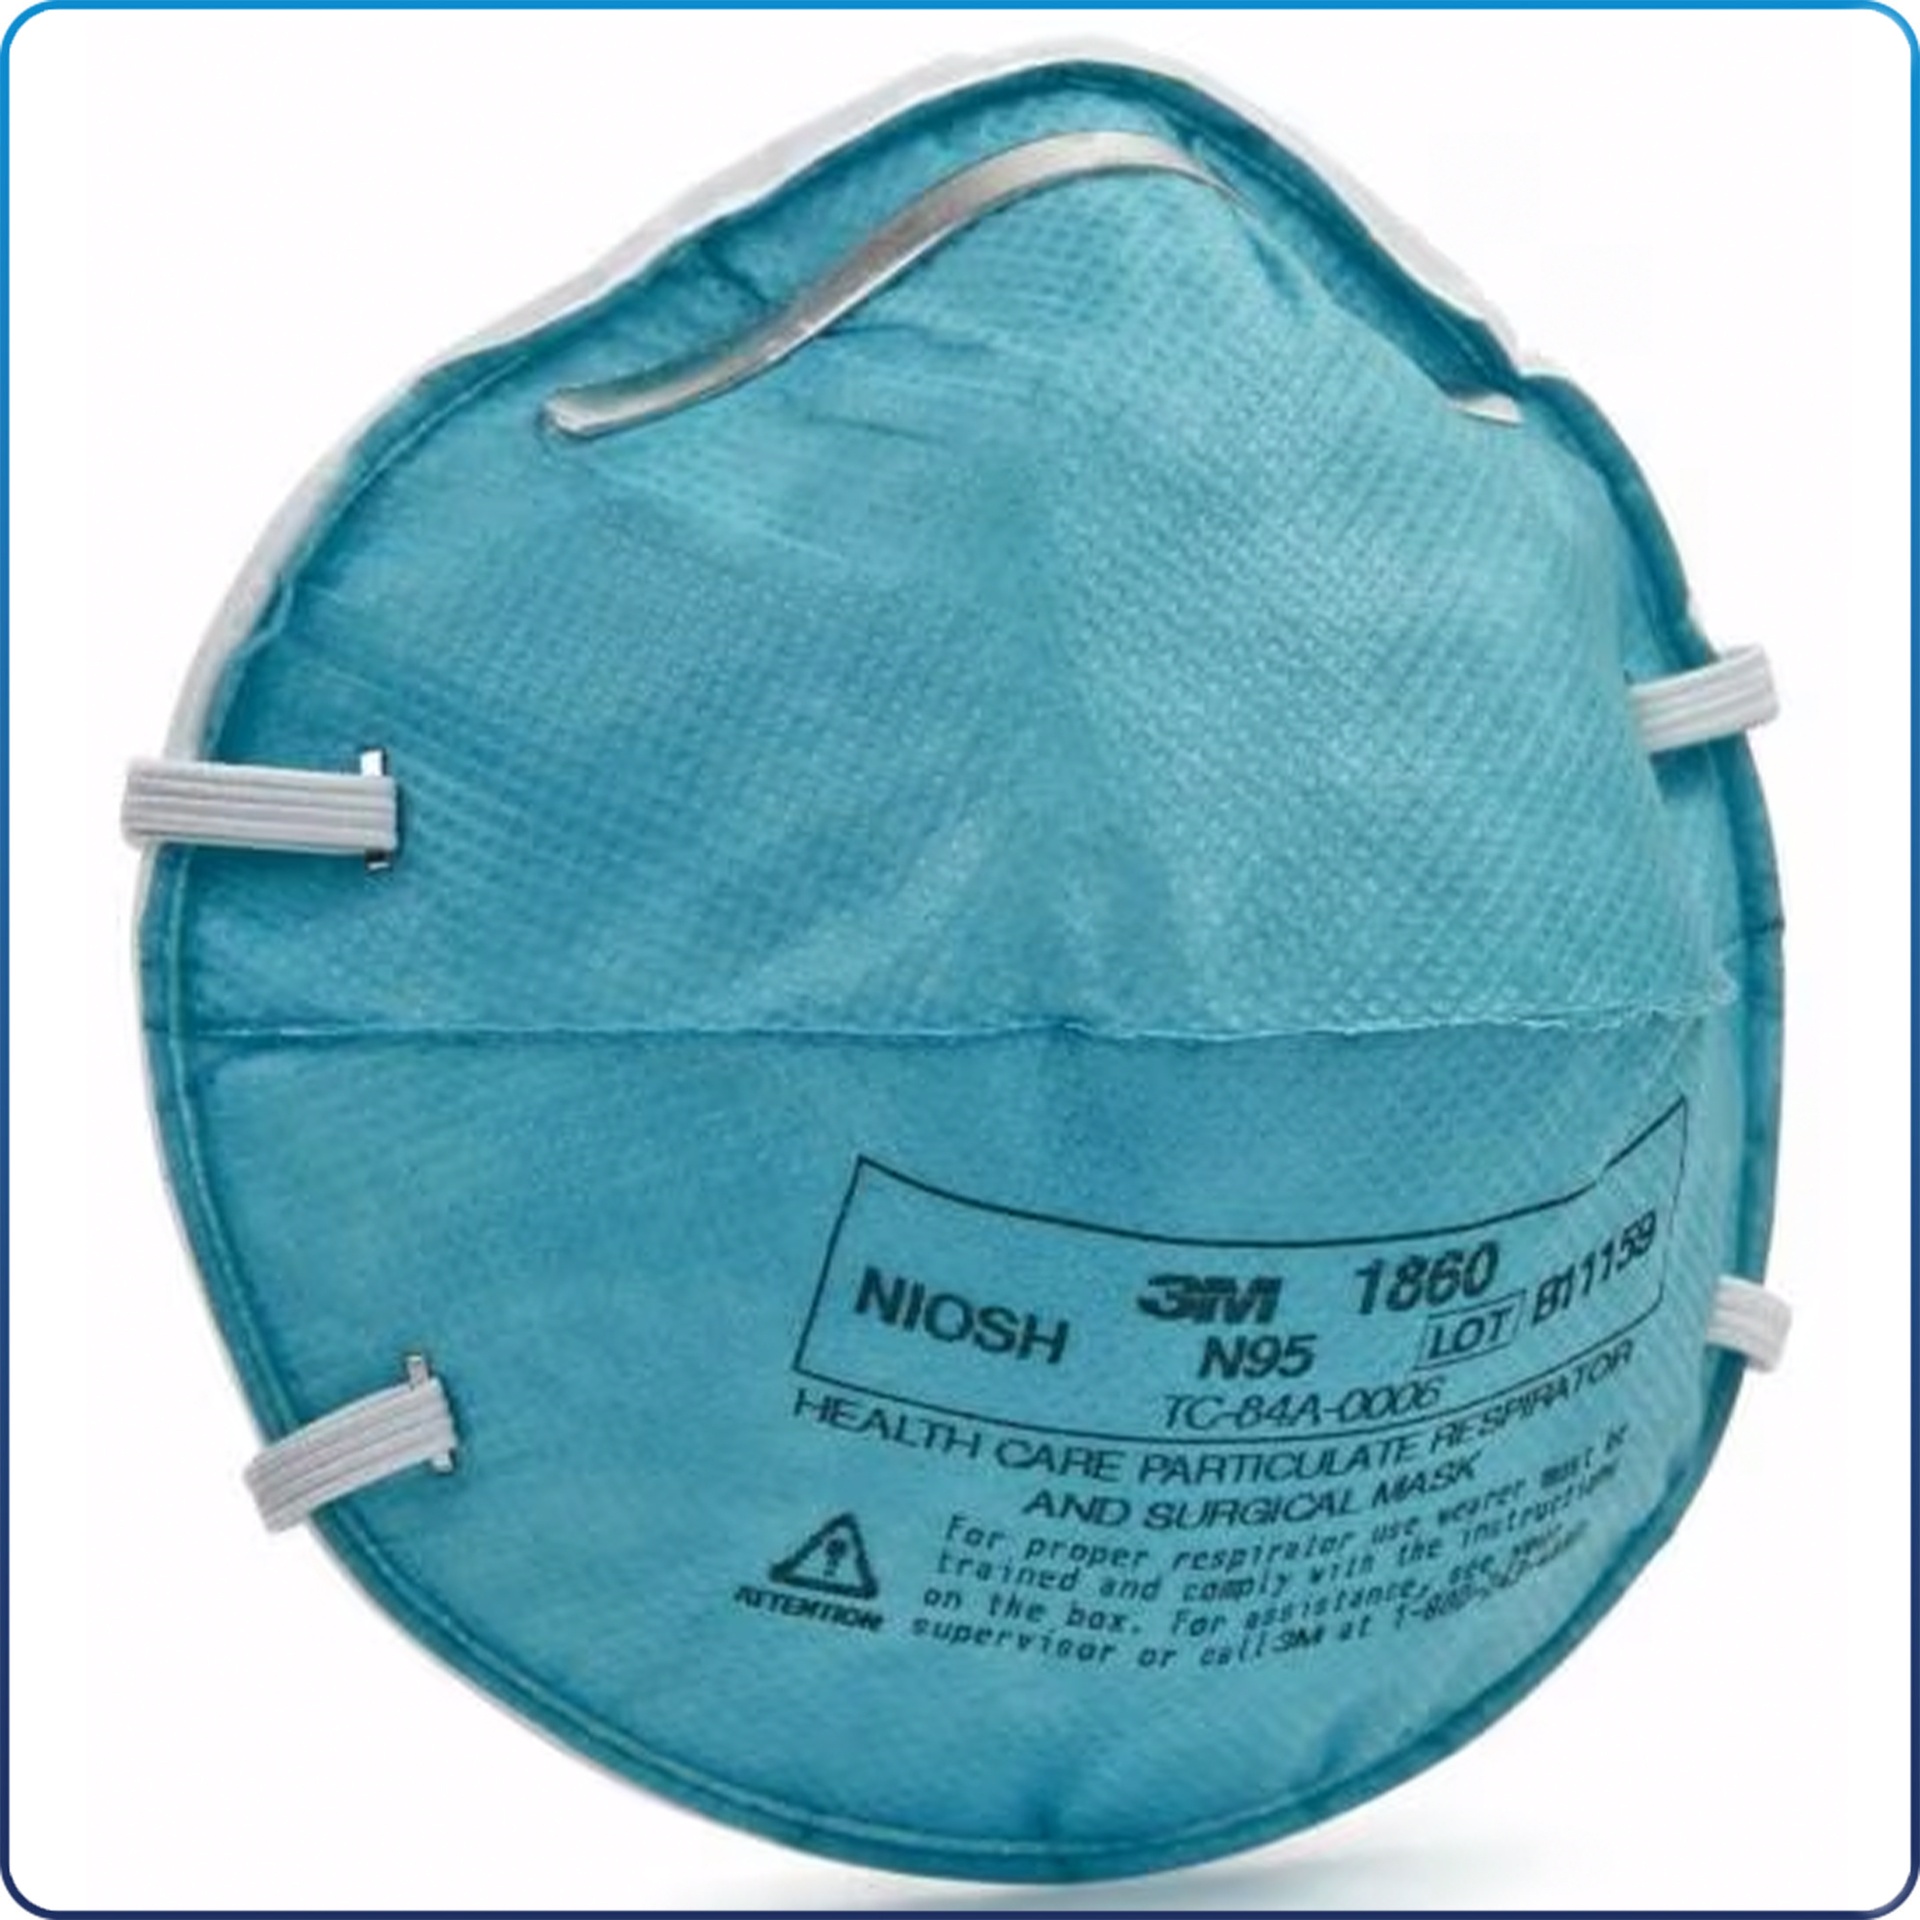 3M™ Health Care Particulate Respirator Mask N95 20/bx